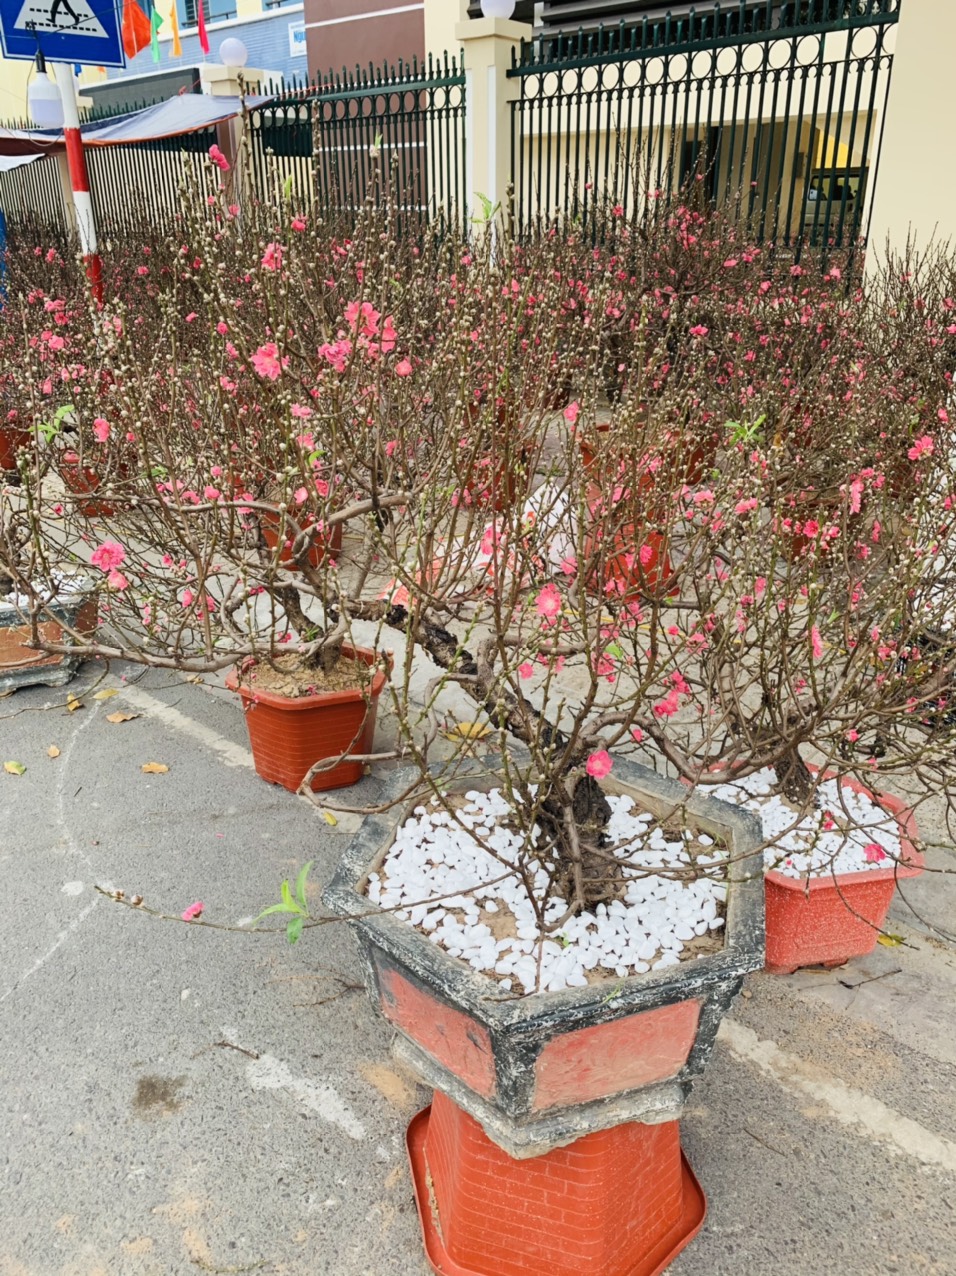 Peach blossom trees transported from northern region are being sold in Nha Trang